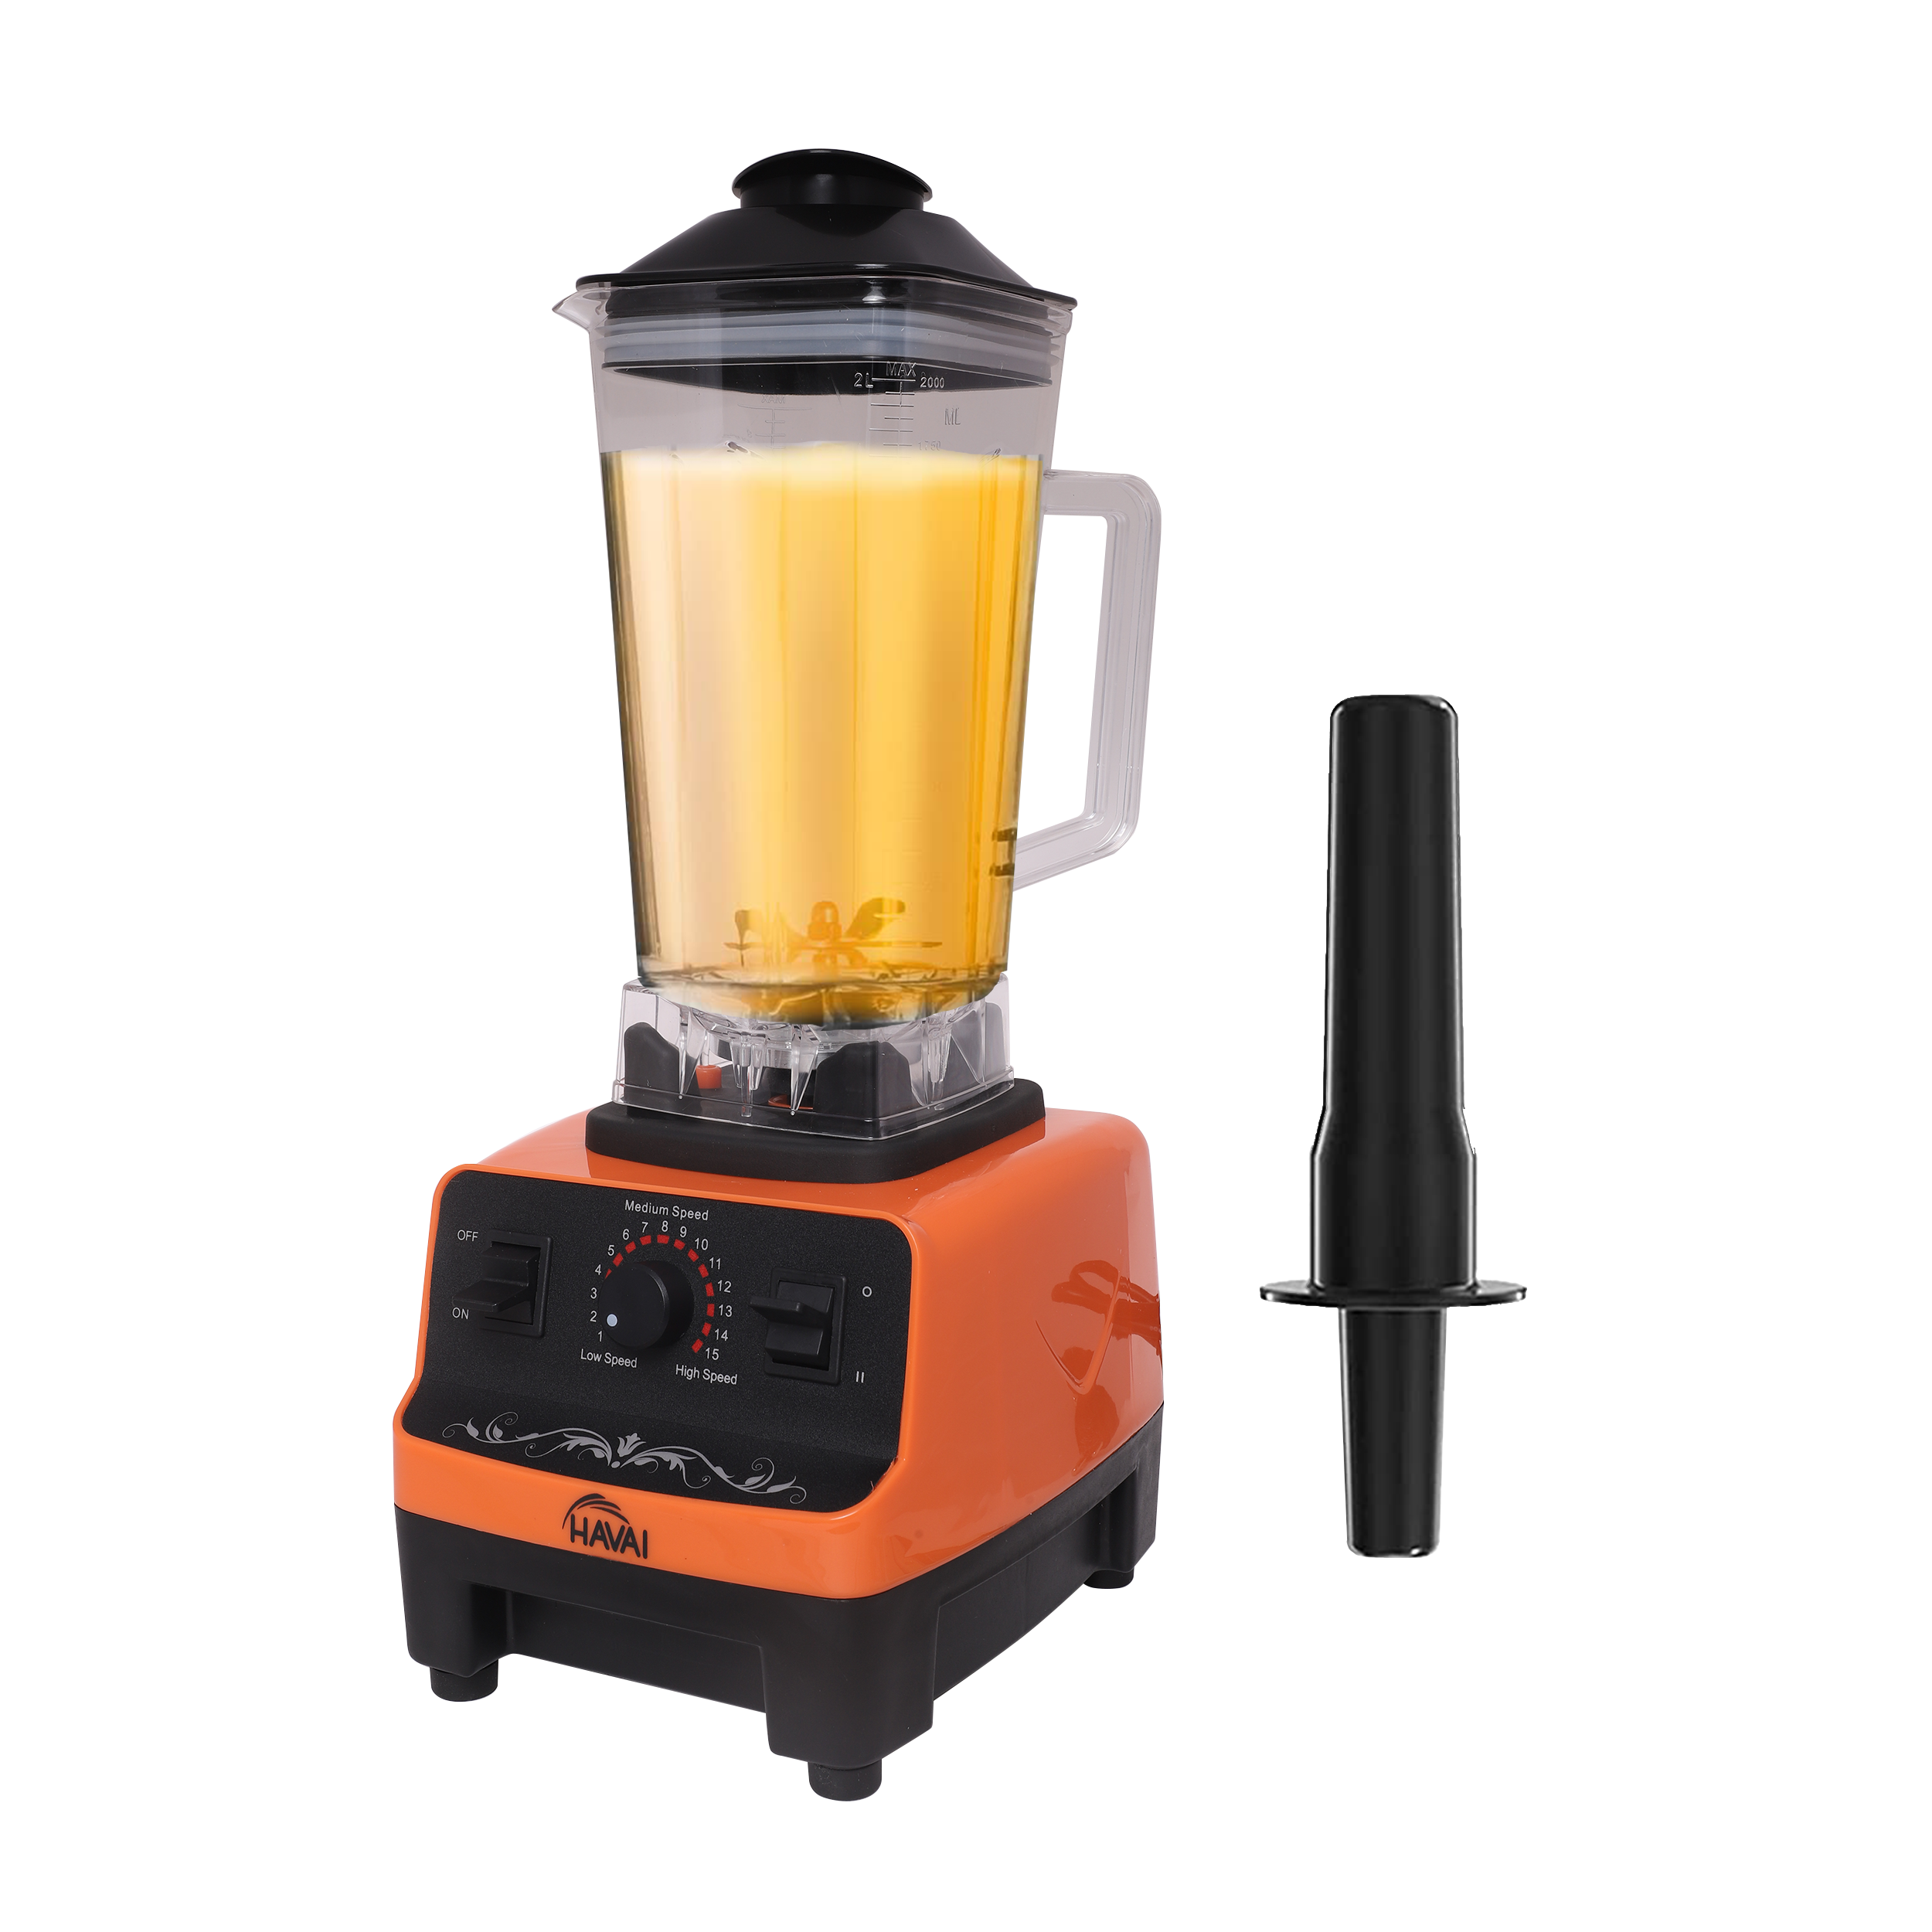 Buy now Crompton mixer grinder to make easy and quick recipes.